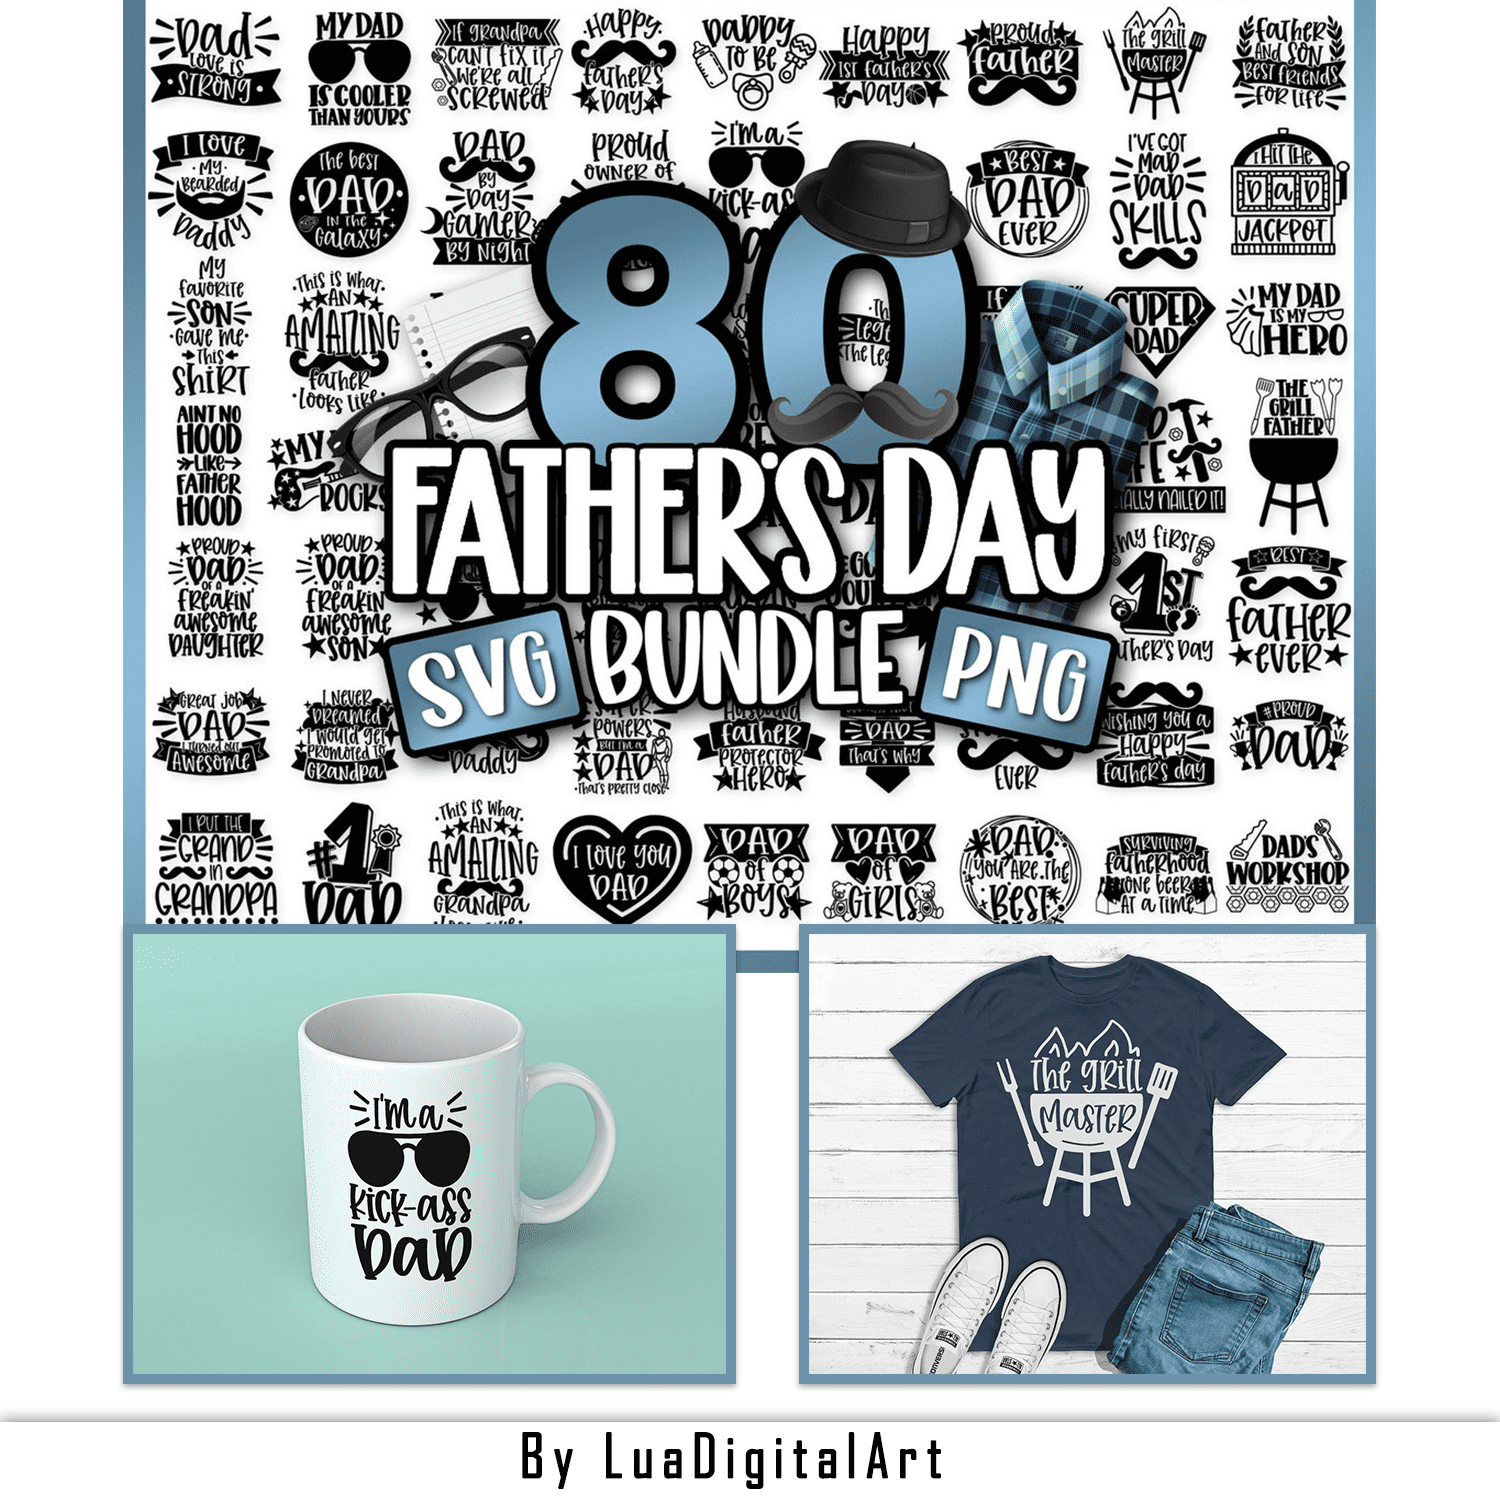 Fathers Day Svg Bundle | Dad Svg | Svg Cut Files For Cricut cover.